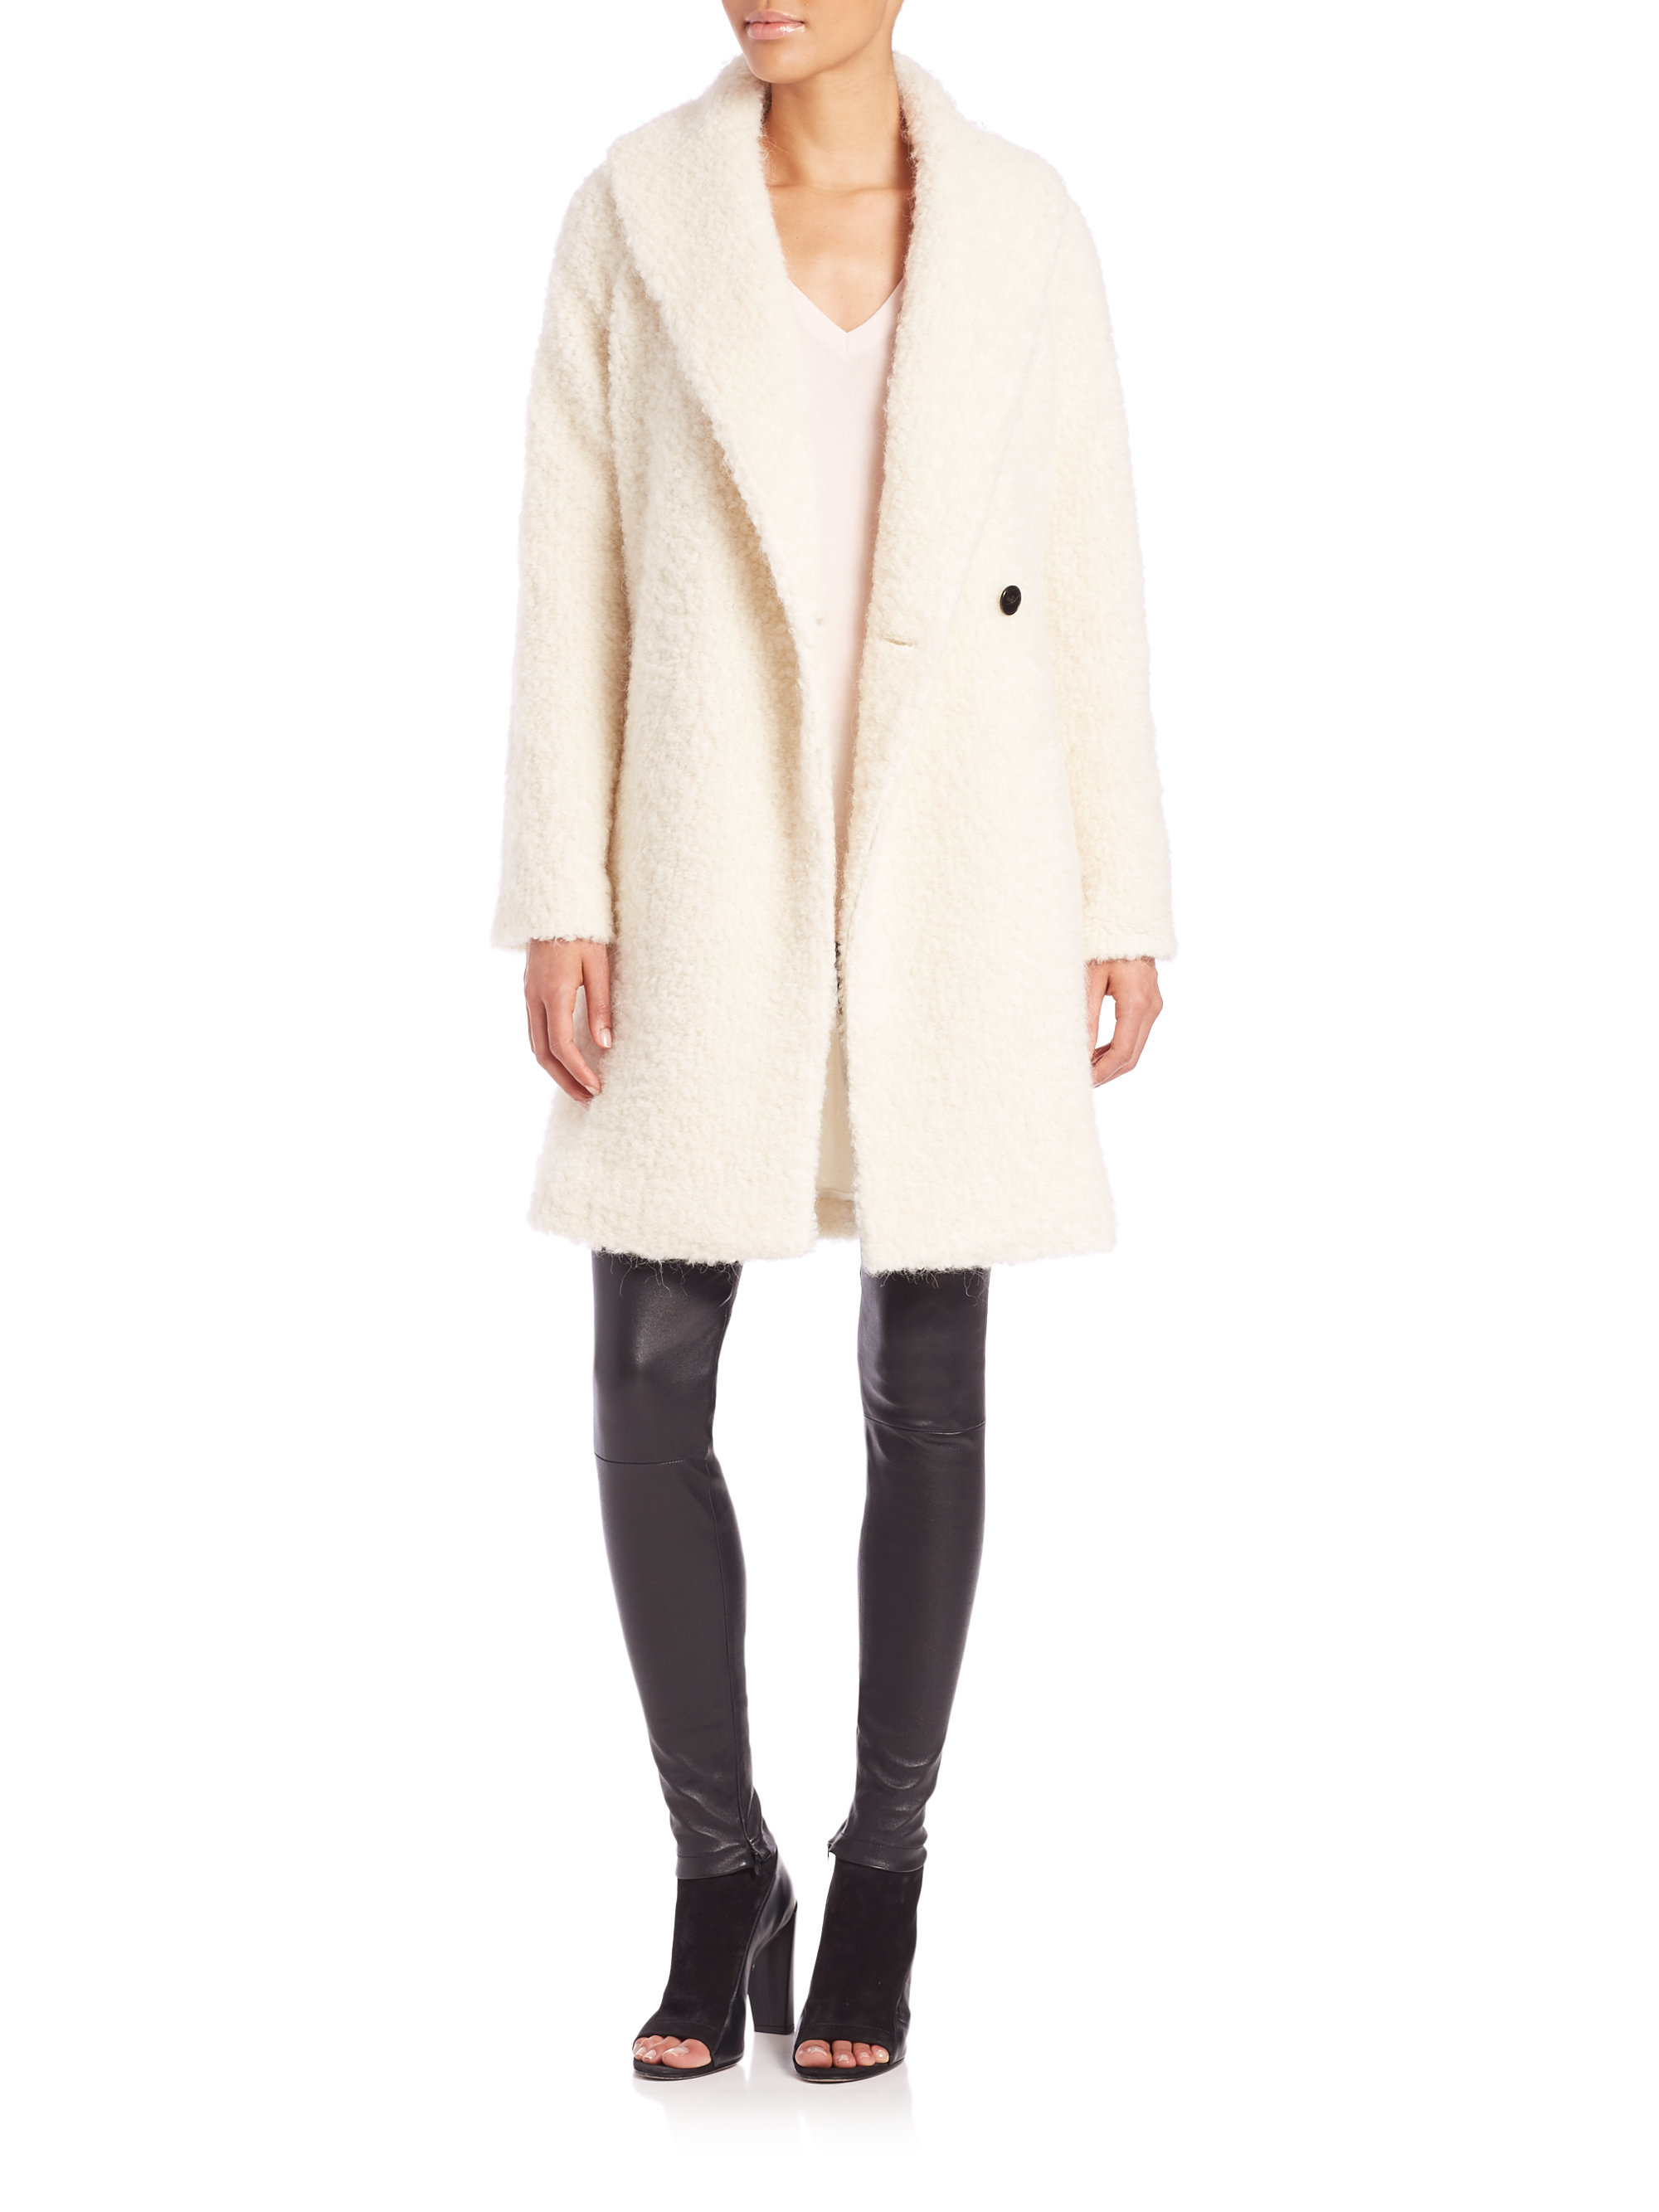 Vince Wool Fuzzy-knit Coat in Natural - Lyst